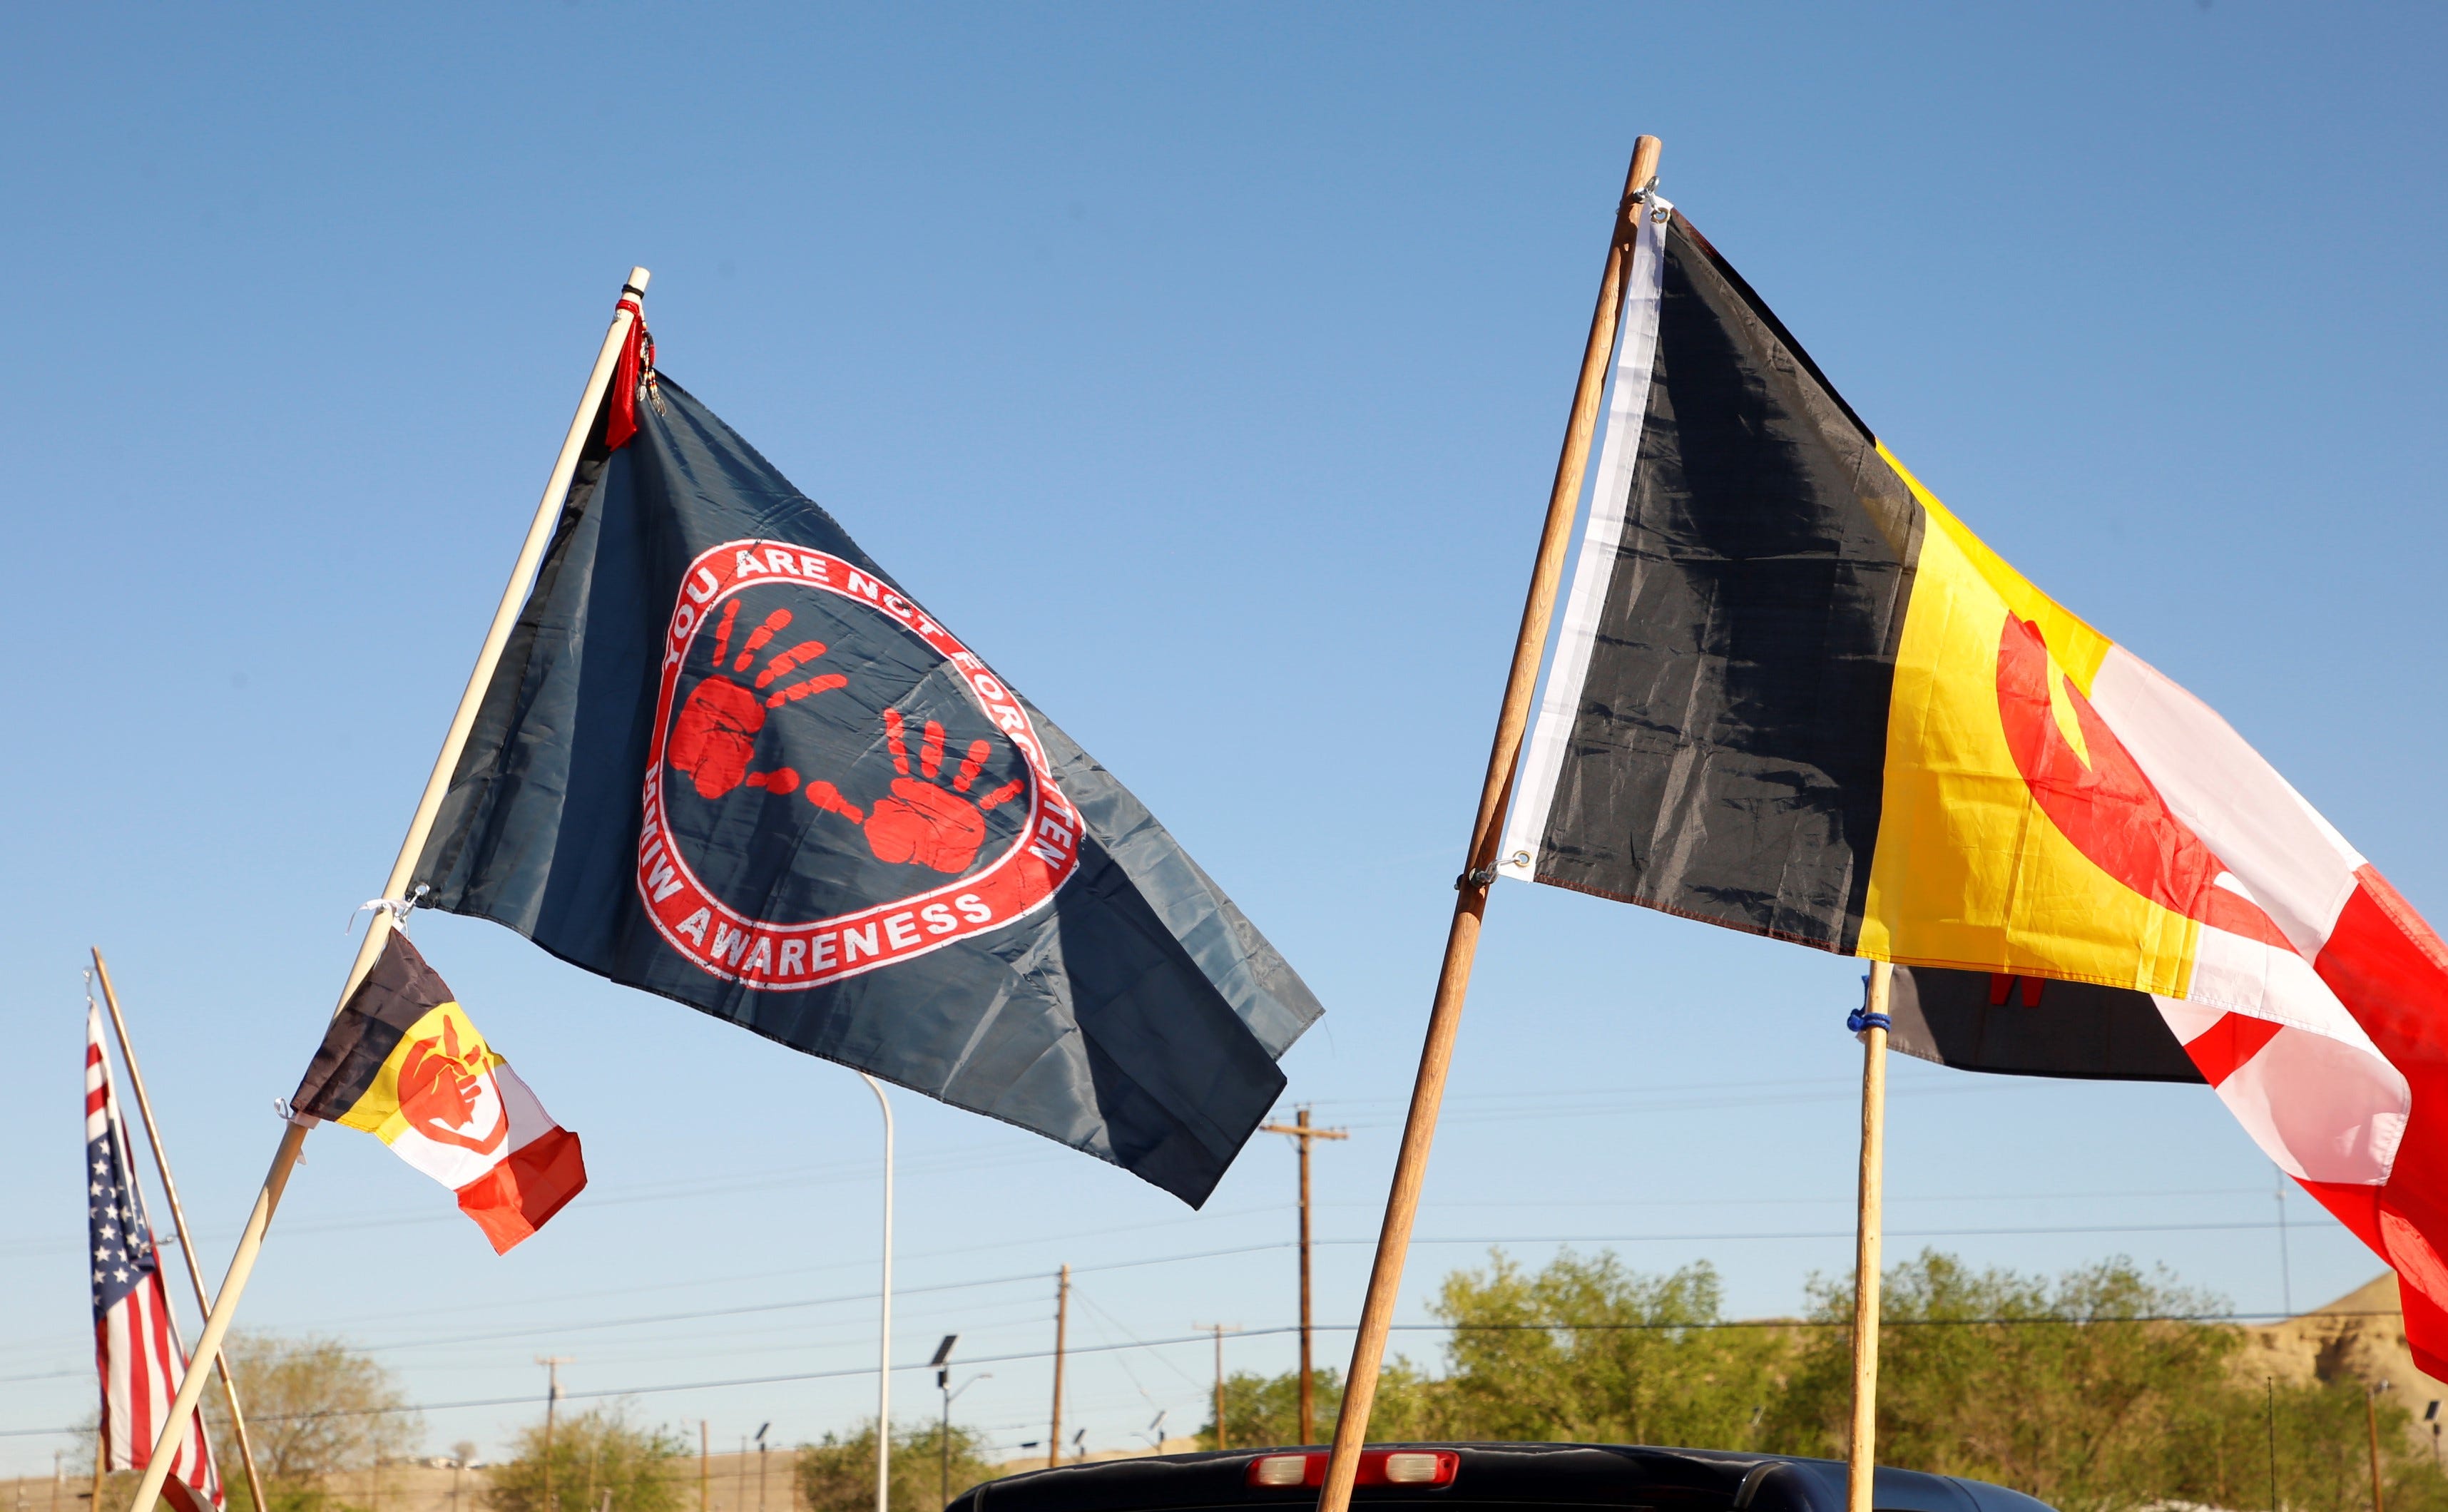 Participants carried flags for Missing and Murdered Indigenous Women and for the American Indian Movement during the MMIW memorial honor walk on May 5 in Shiprock.